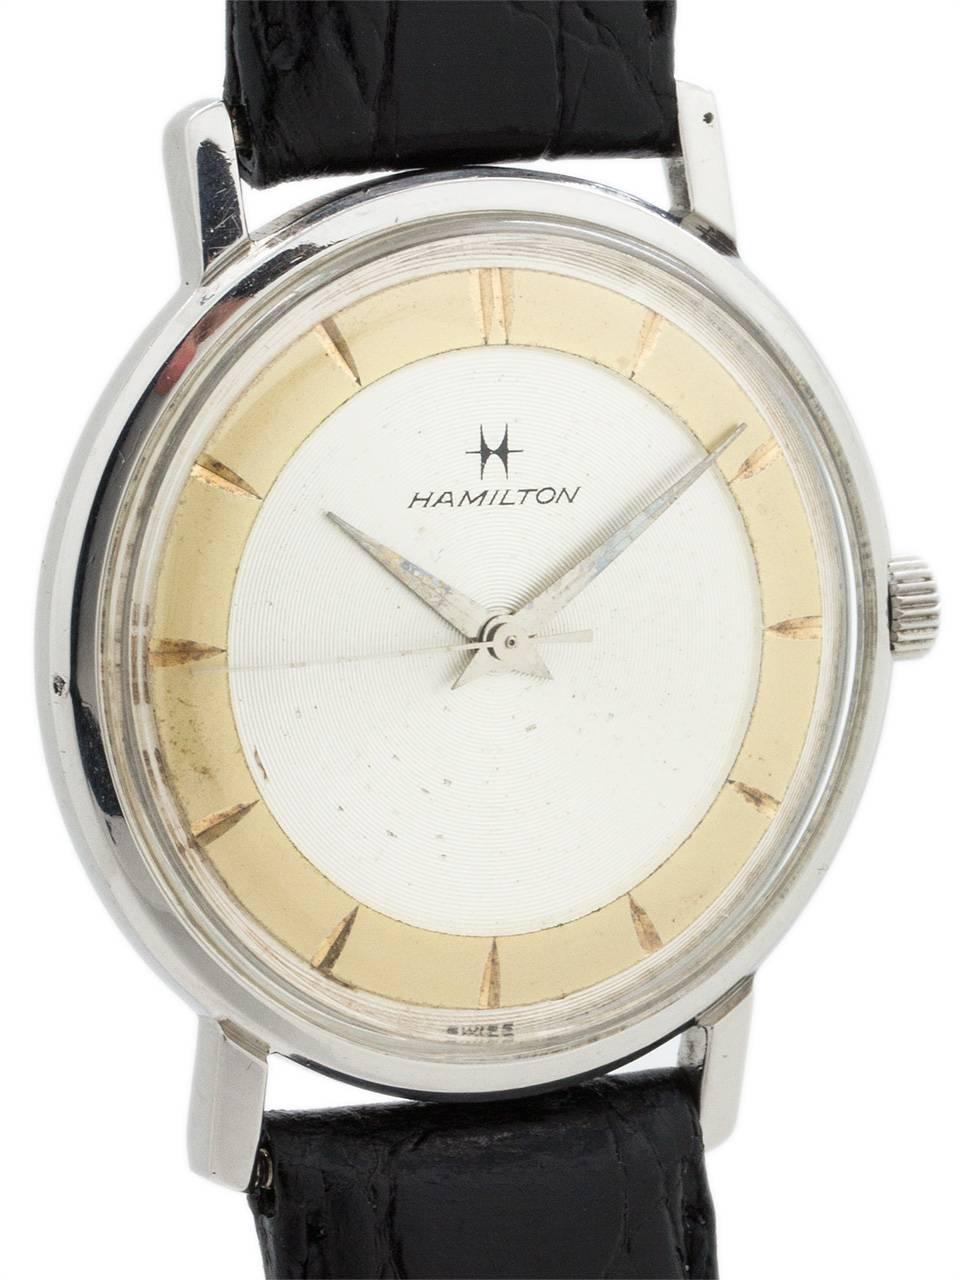 
 Hamilton “Sea Guard” automatic stainless steel circa 1961. Featuring 33mm diameter thin case with beautiful original 2 tone dial with slender applied silver indexes and tapered silver hands. Powered by self winding caliber 688 self winding